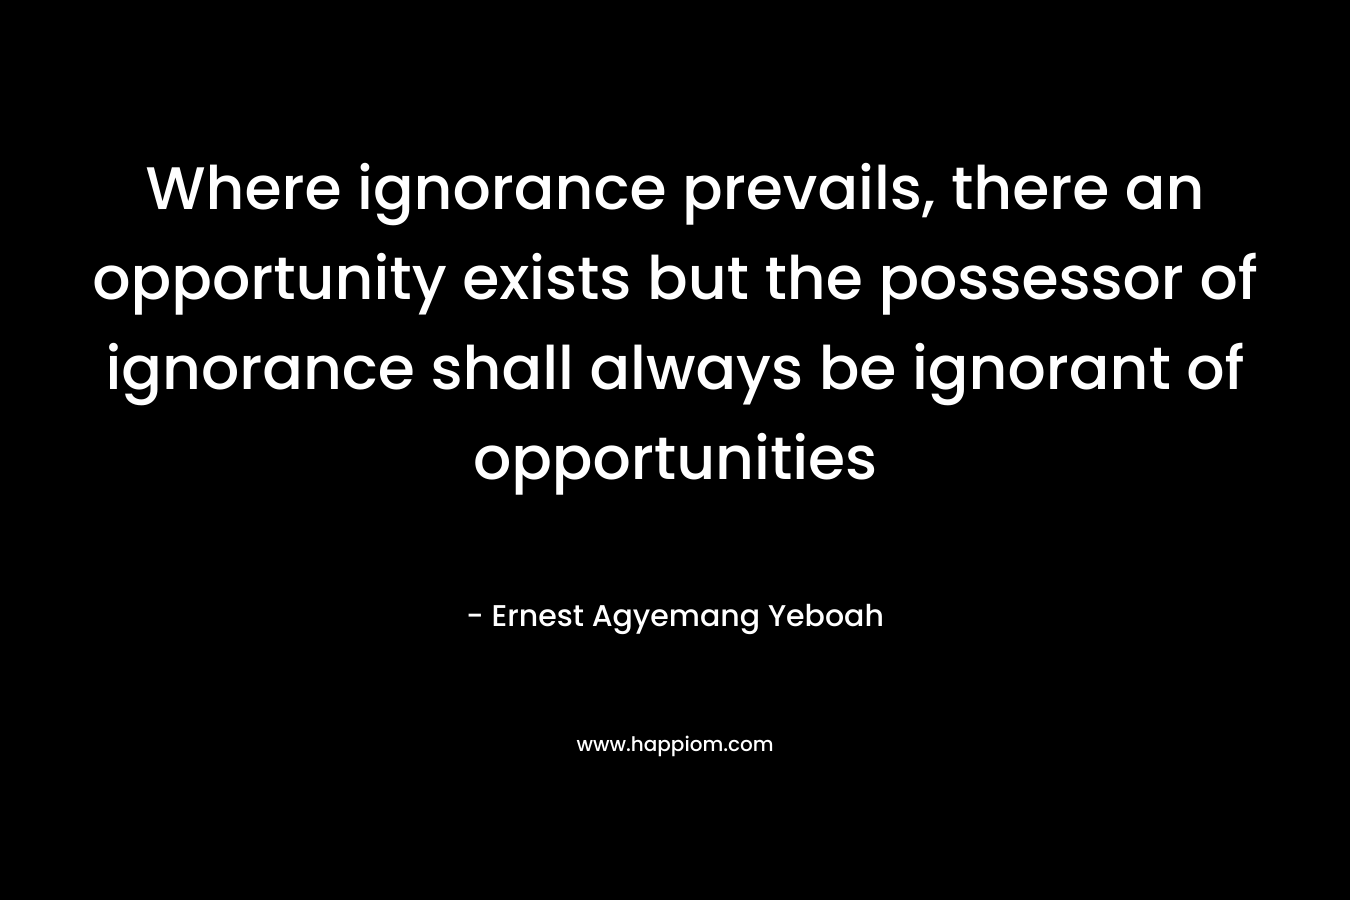 Where ignorance prevails, there an opportunity exists but the possessor of ignorance shall always be ignorant of opportunities – Ernest Agyemang Yeboah